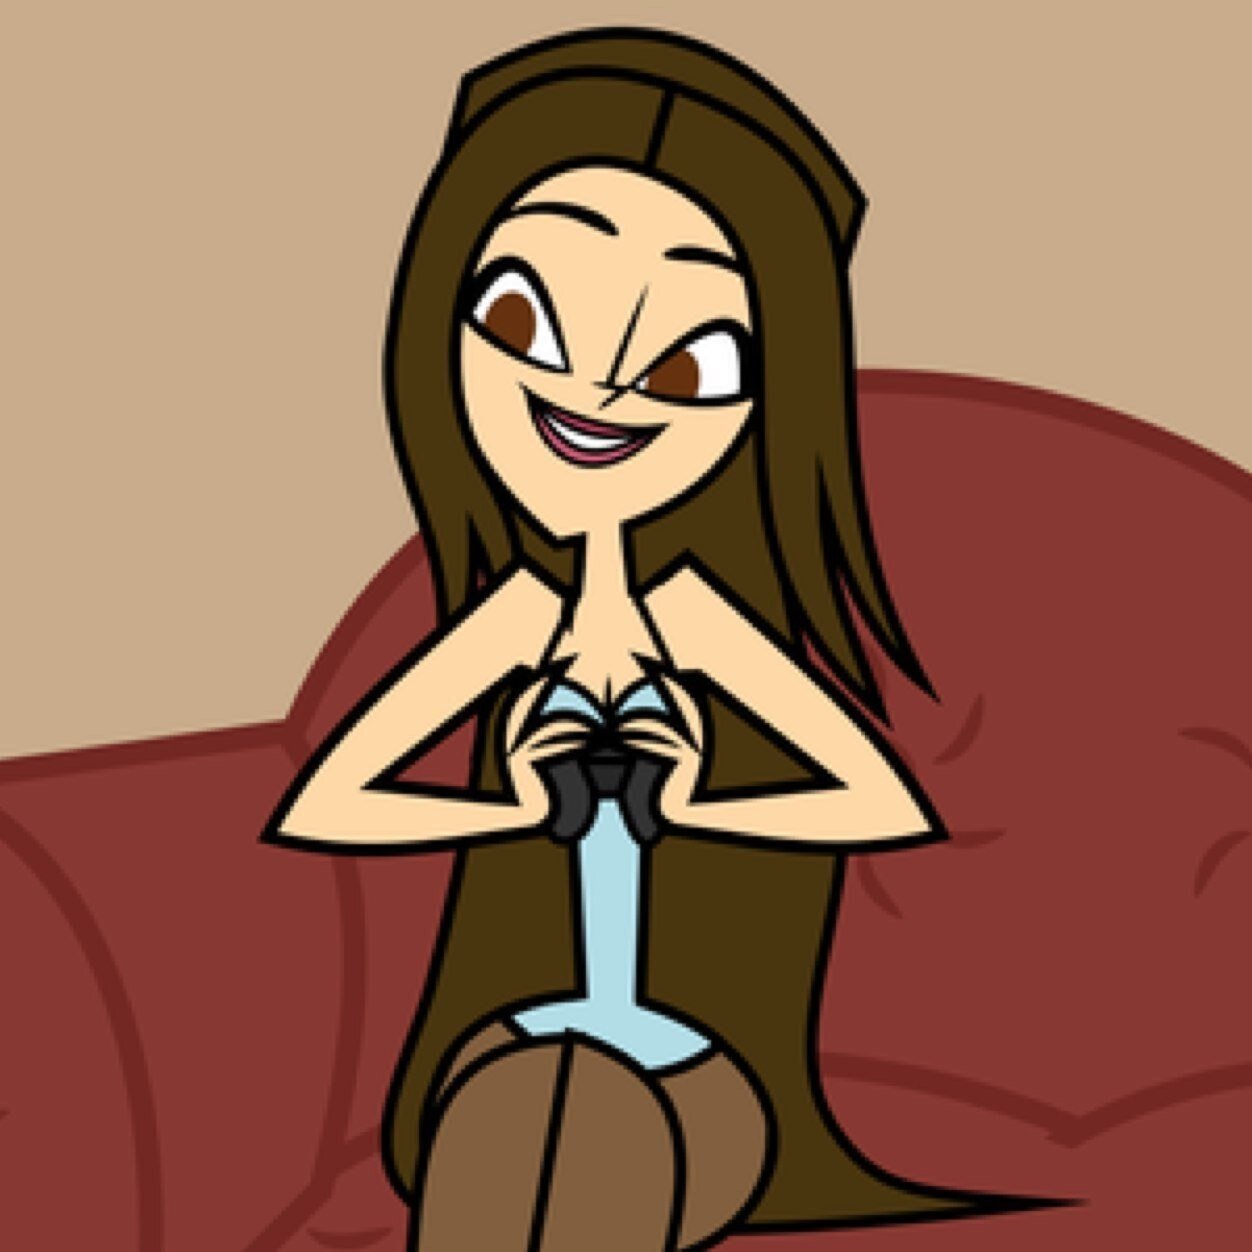 Hello! My name's Alondra, I love Total Drama, Ariana Grande and Justin Bieber. Im also a Therapist, So feel free to talk to me about anything.